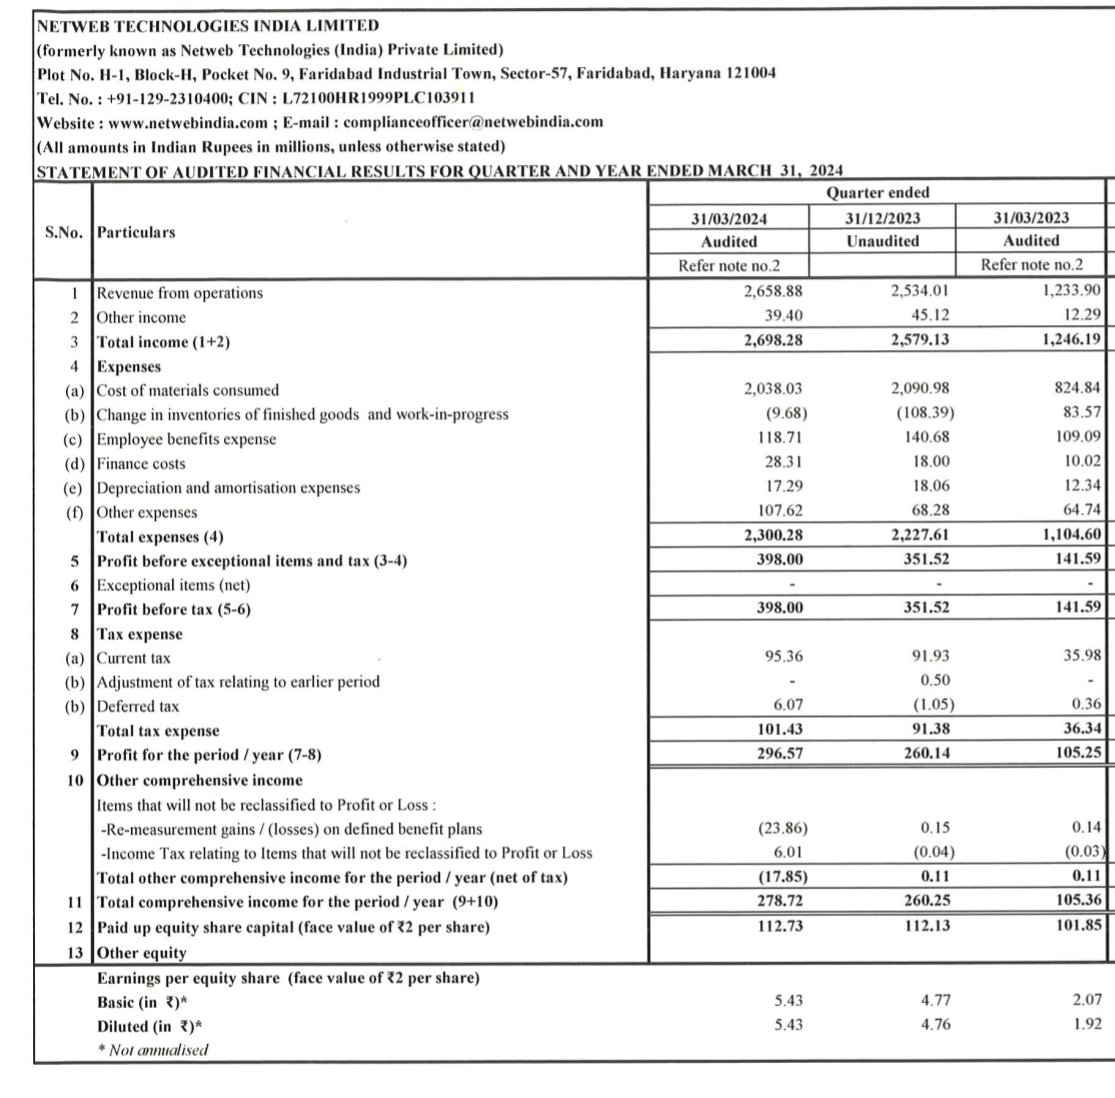 Netweb Technologies 
#NETWEB

Solid #Q4FY23🔥

Highest ever revenue, EBITDA, PBT and PAT in comps history 🔥

Delivers a great set

Rev at 265cr vs 123cr
Q3 at 253cr

PBT at 40cr vs 14cr
Q3 at 35cr

PAT at 30cr vs 10cr
Q3 at 26cr

OCF could ve been better 
At 18cr vs 27cr
Needs…